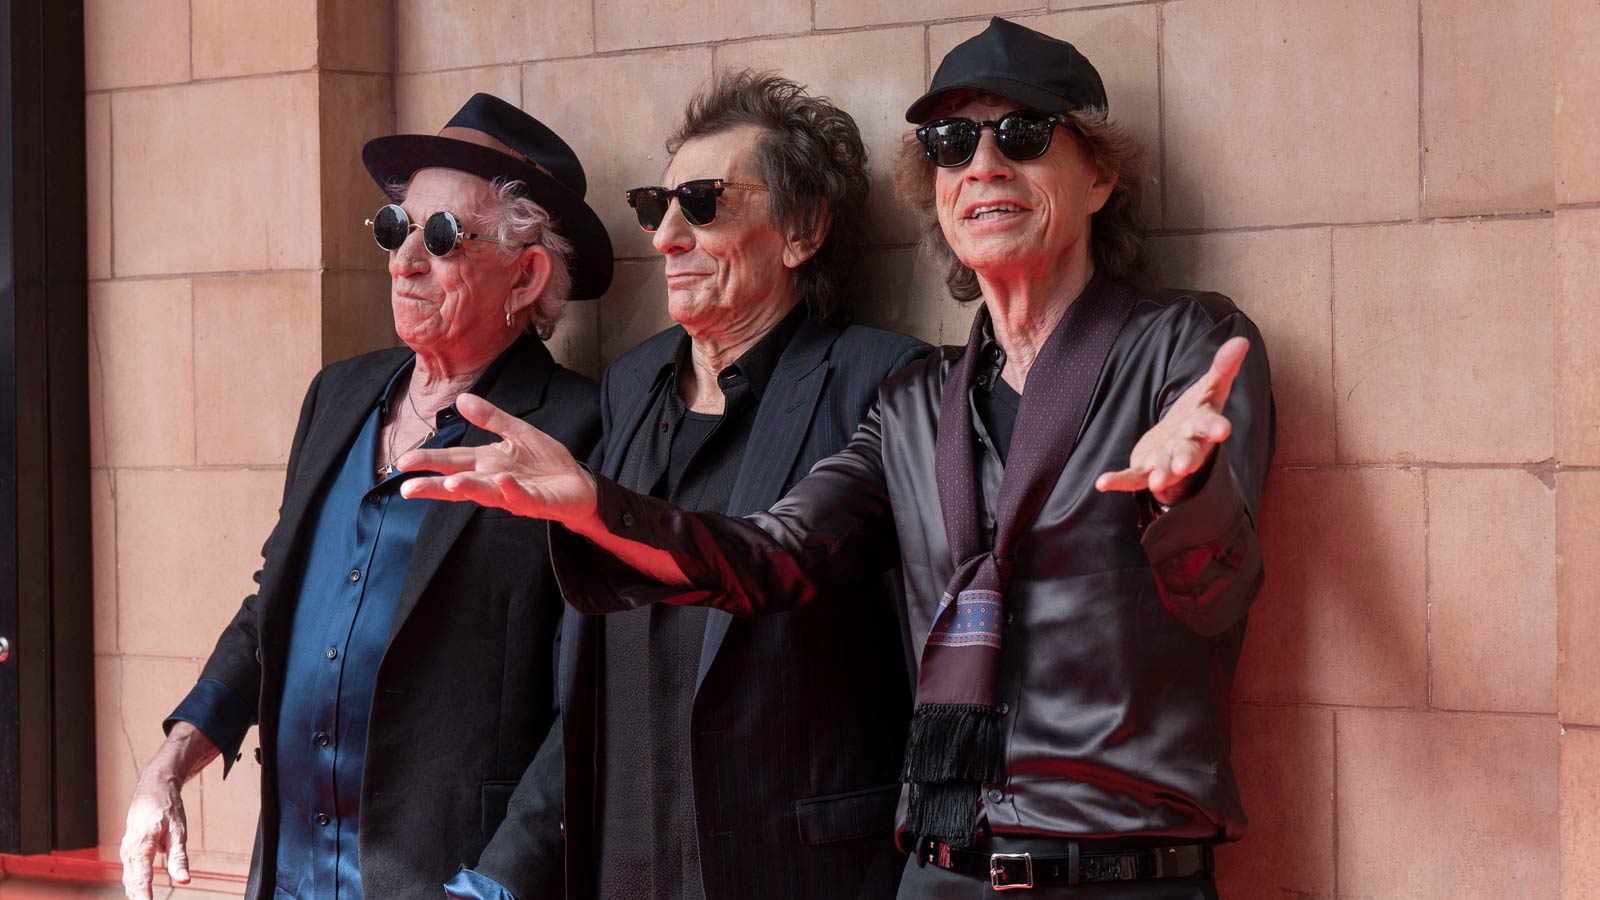 Satisfaction: Rolling Stones to play at State Farm Stadium in Glendale on 2024 tour